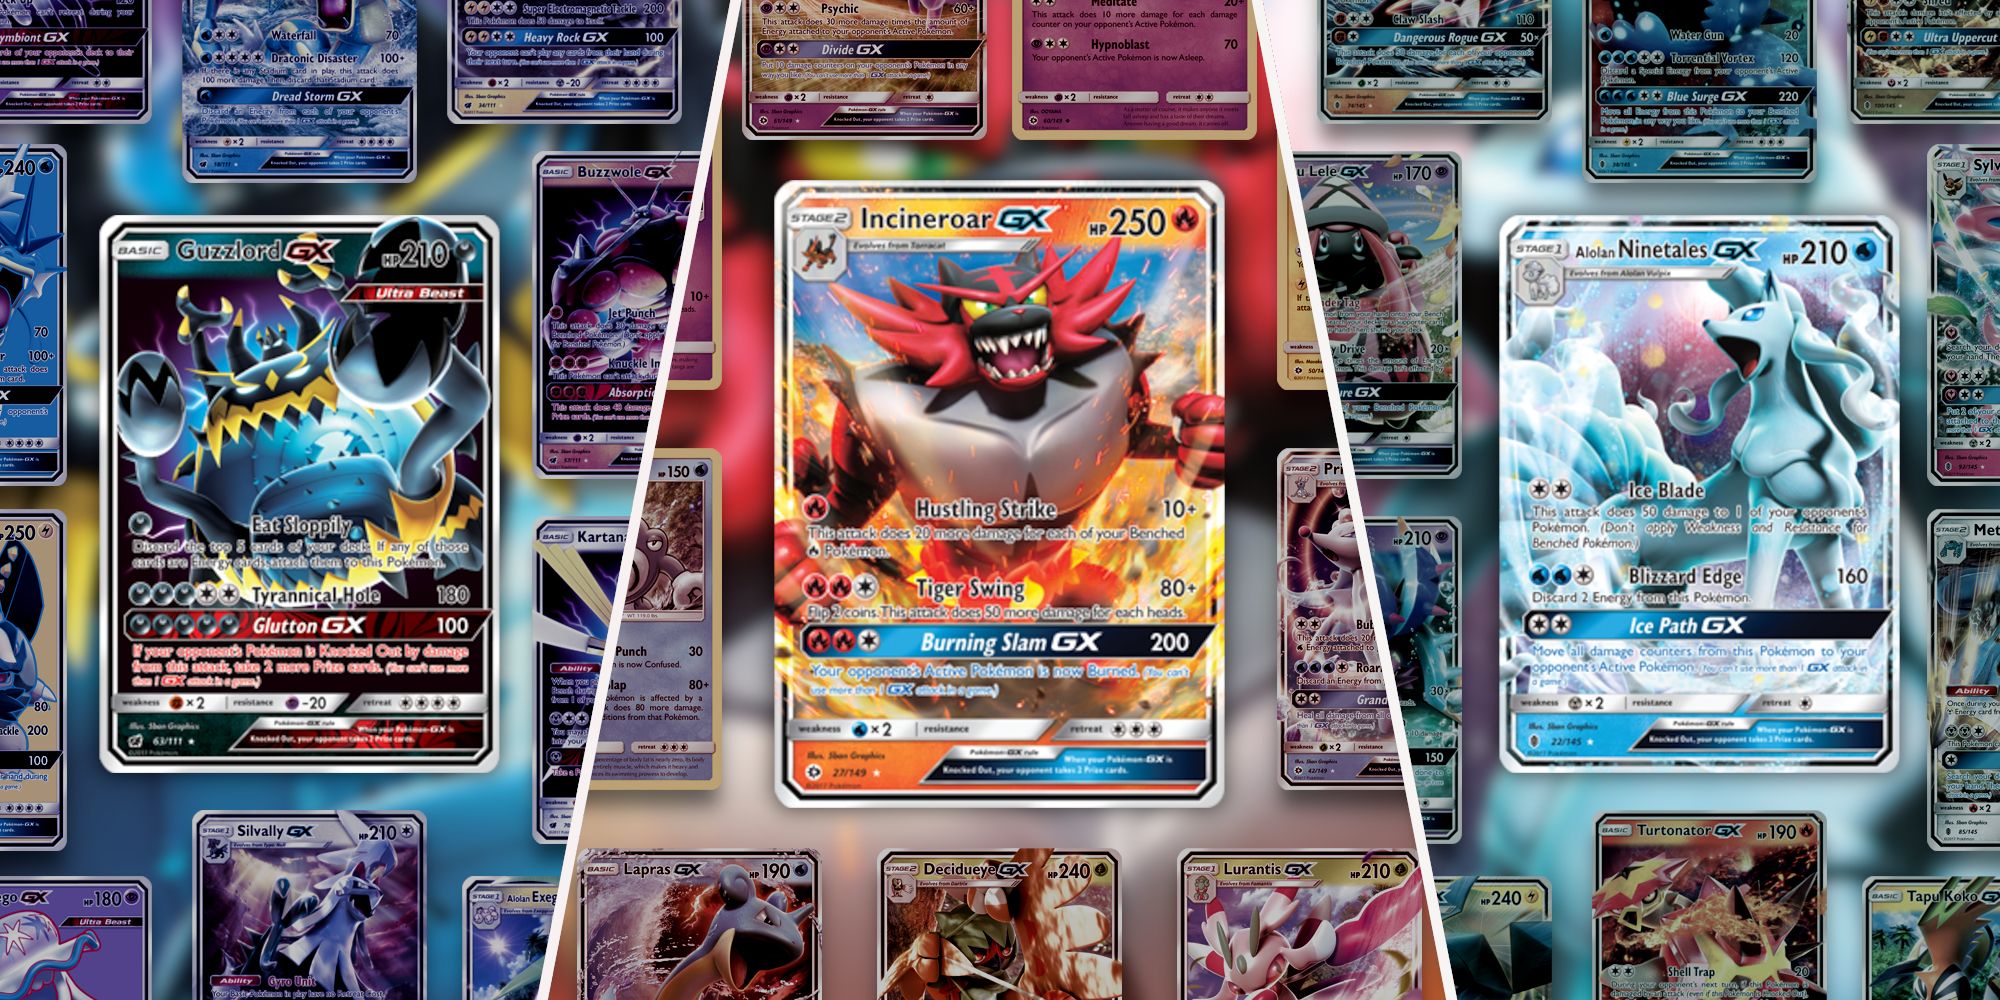 Guzzlord GX with Sun & Moon Crimson Invasion Cards, Incineroar GX and Sun & Moon Cards, and Ninetails GX with Sun & Moon Guardians Rising